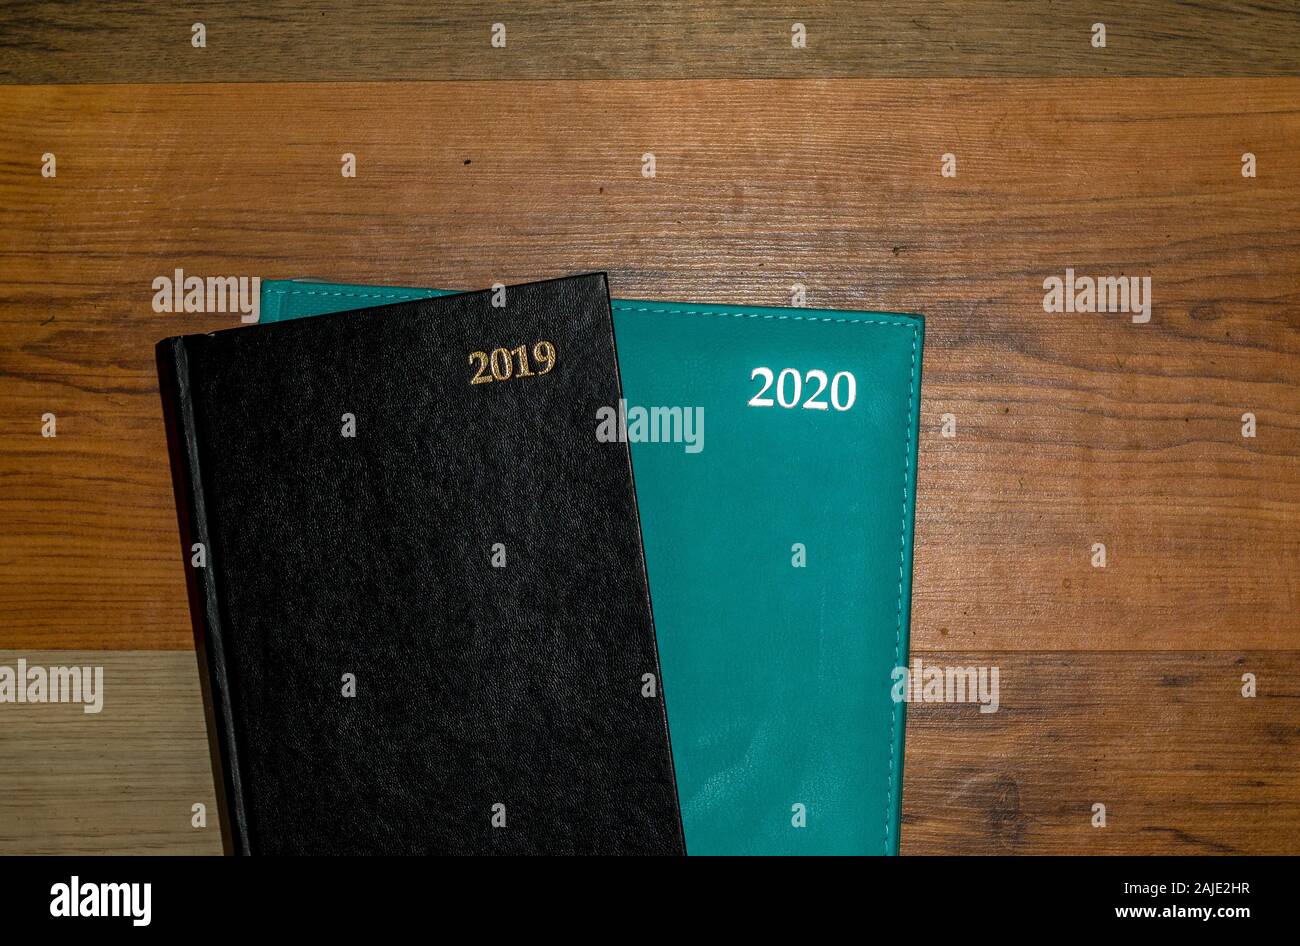 2019 and 2020 diaries isolated on a wooden background image with copy space Stock Photo